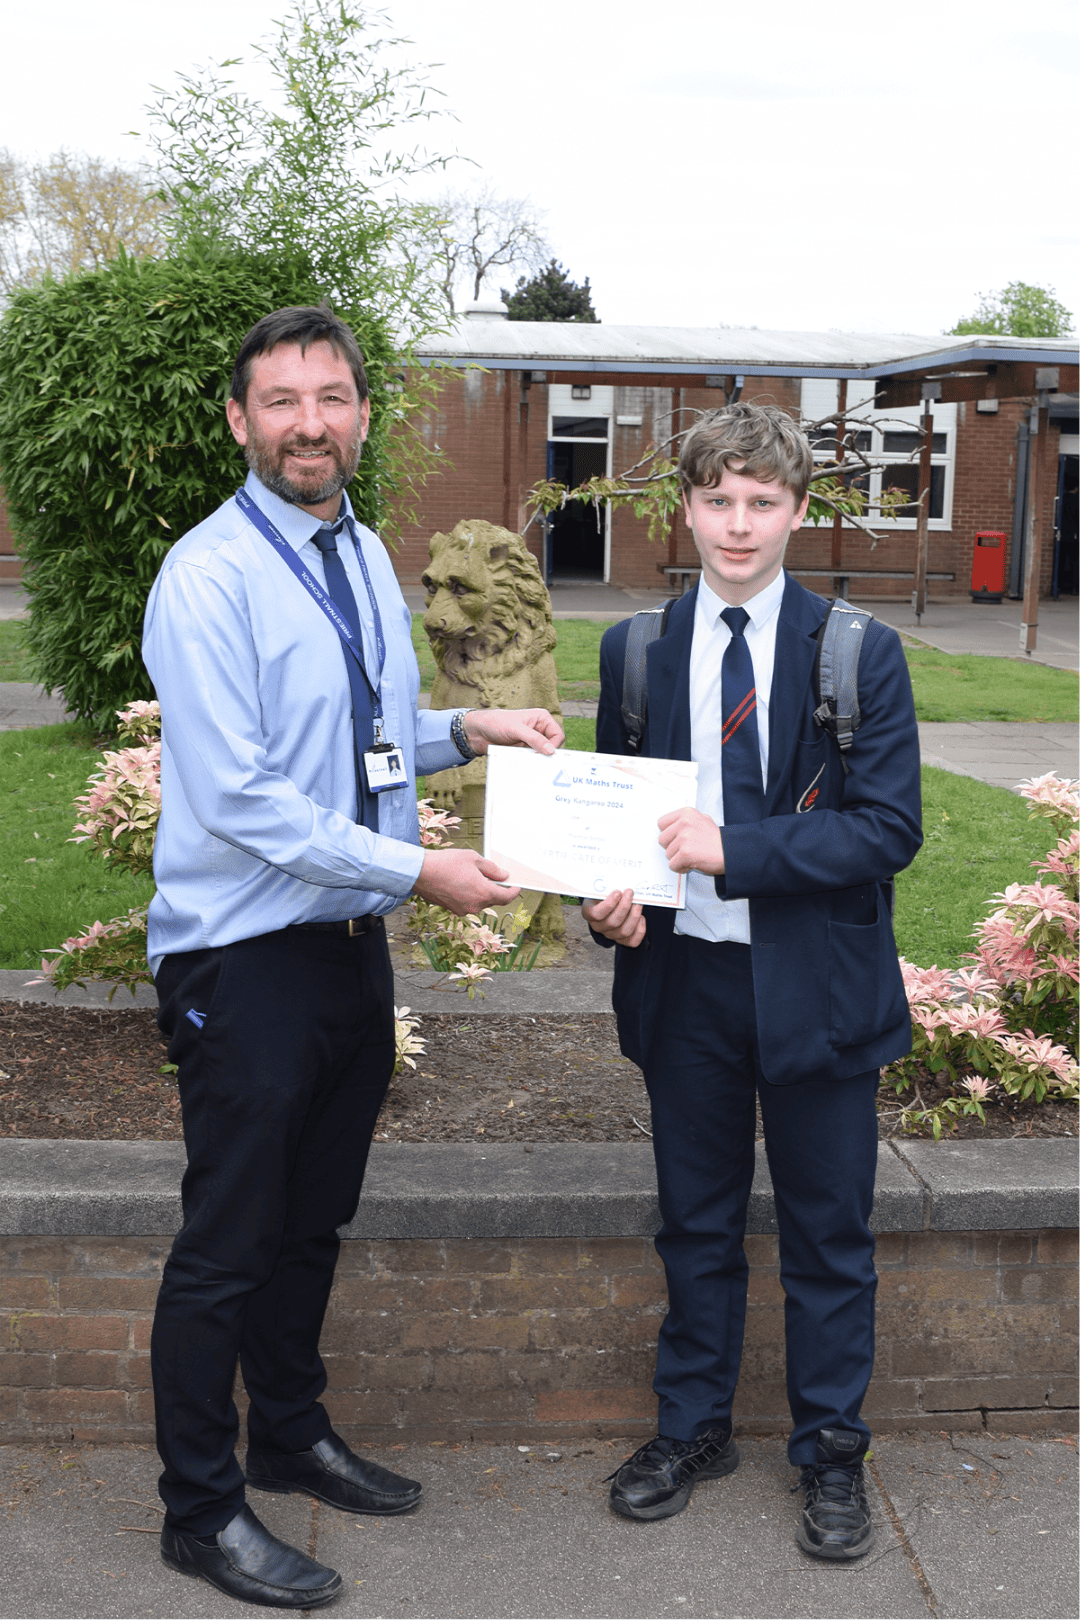 Priestnall School student holds a certificate of merit with a maths teacher after success in UKMT Grey Kangaroo.